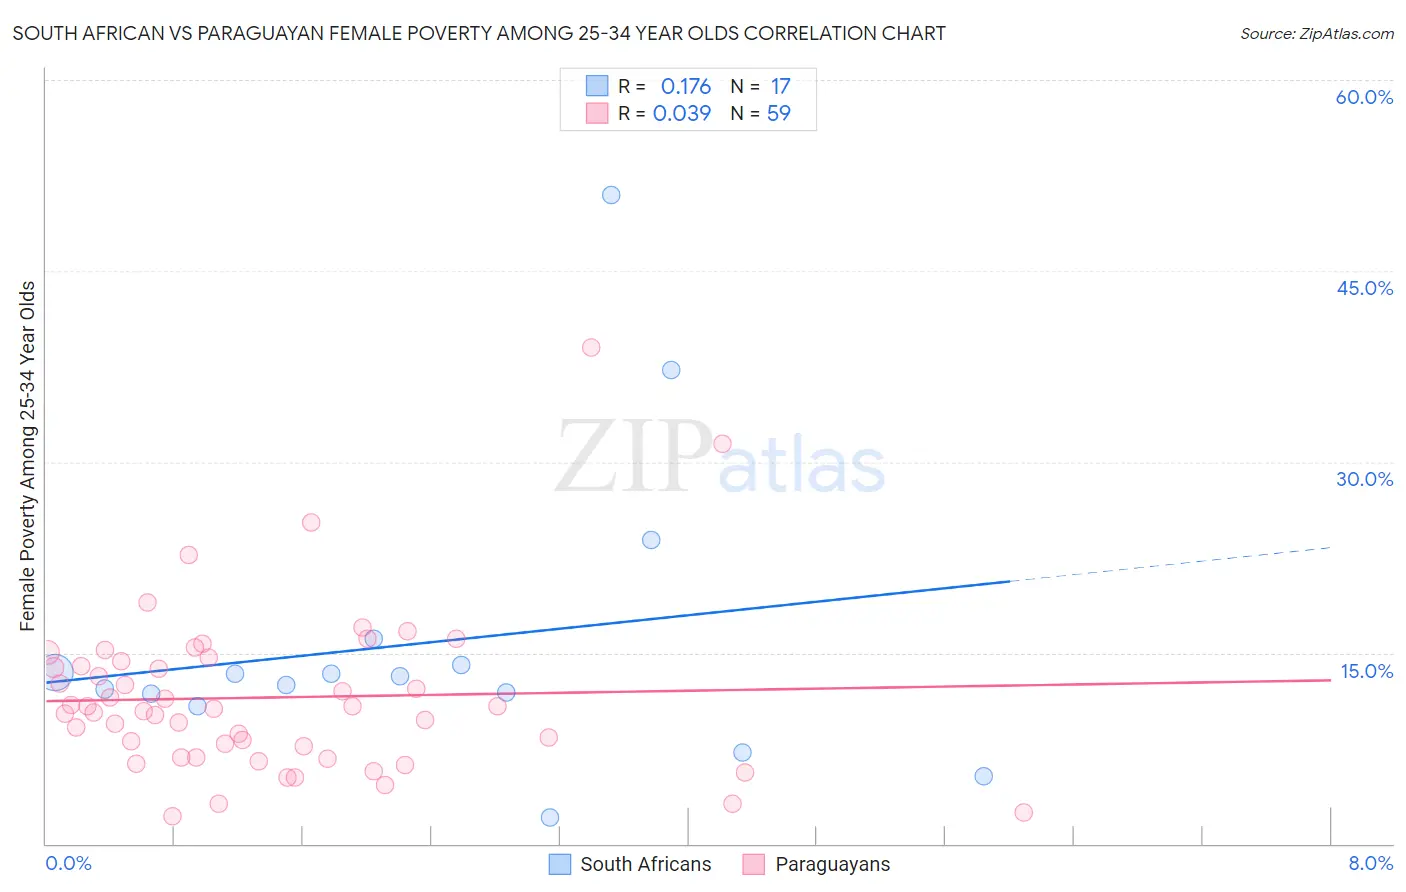 South African vs Paraguayan Female Poverty Among 25-34 Year Olds